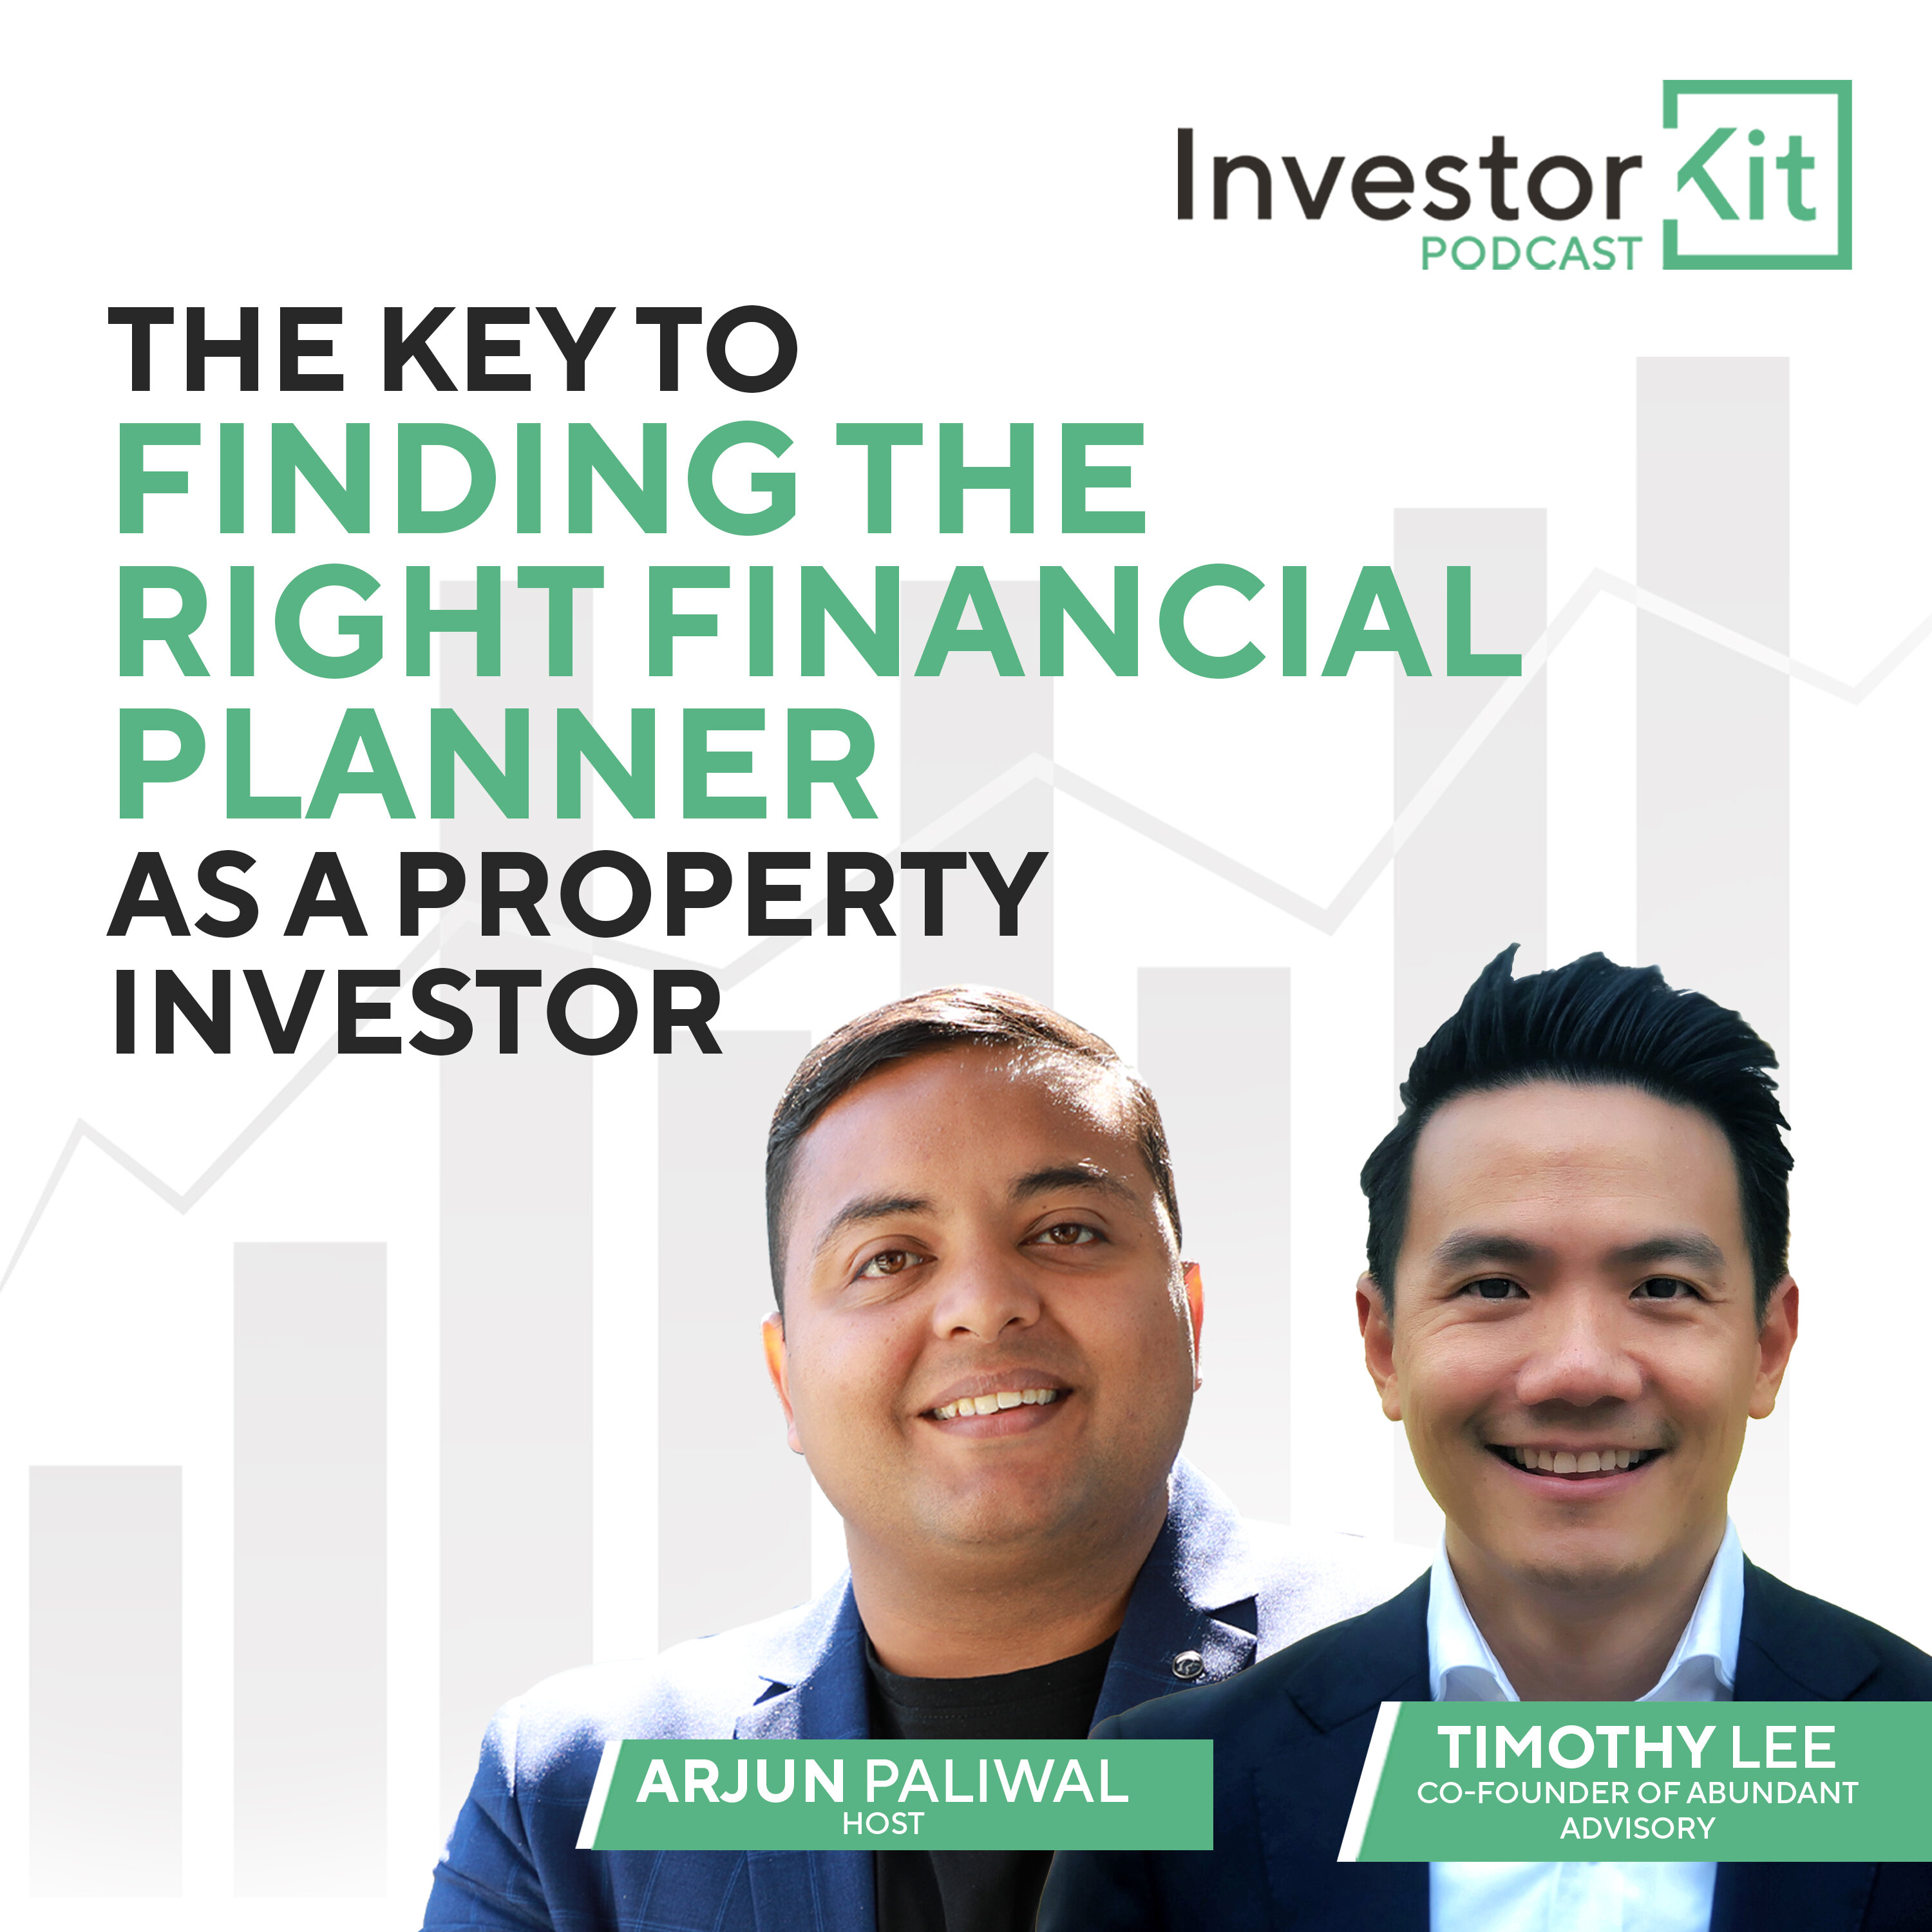 The Key To Finding The Right Financial Planner As A Property Investor